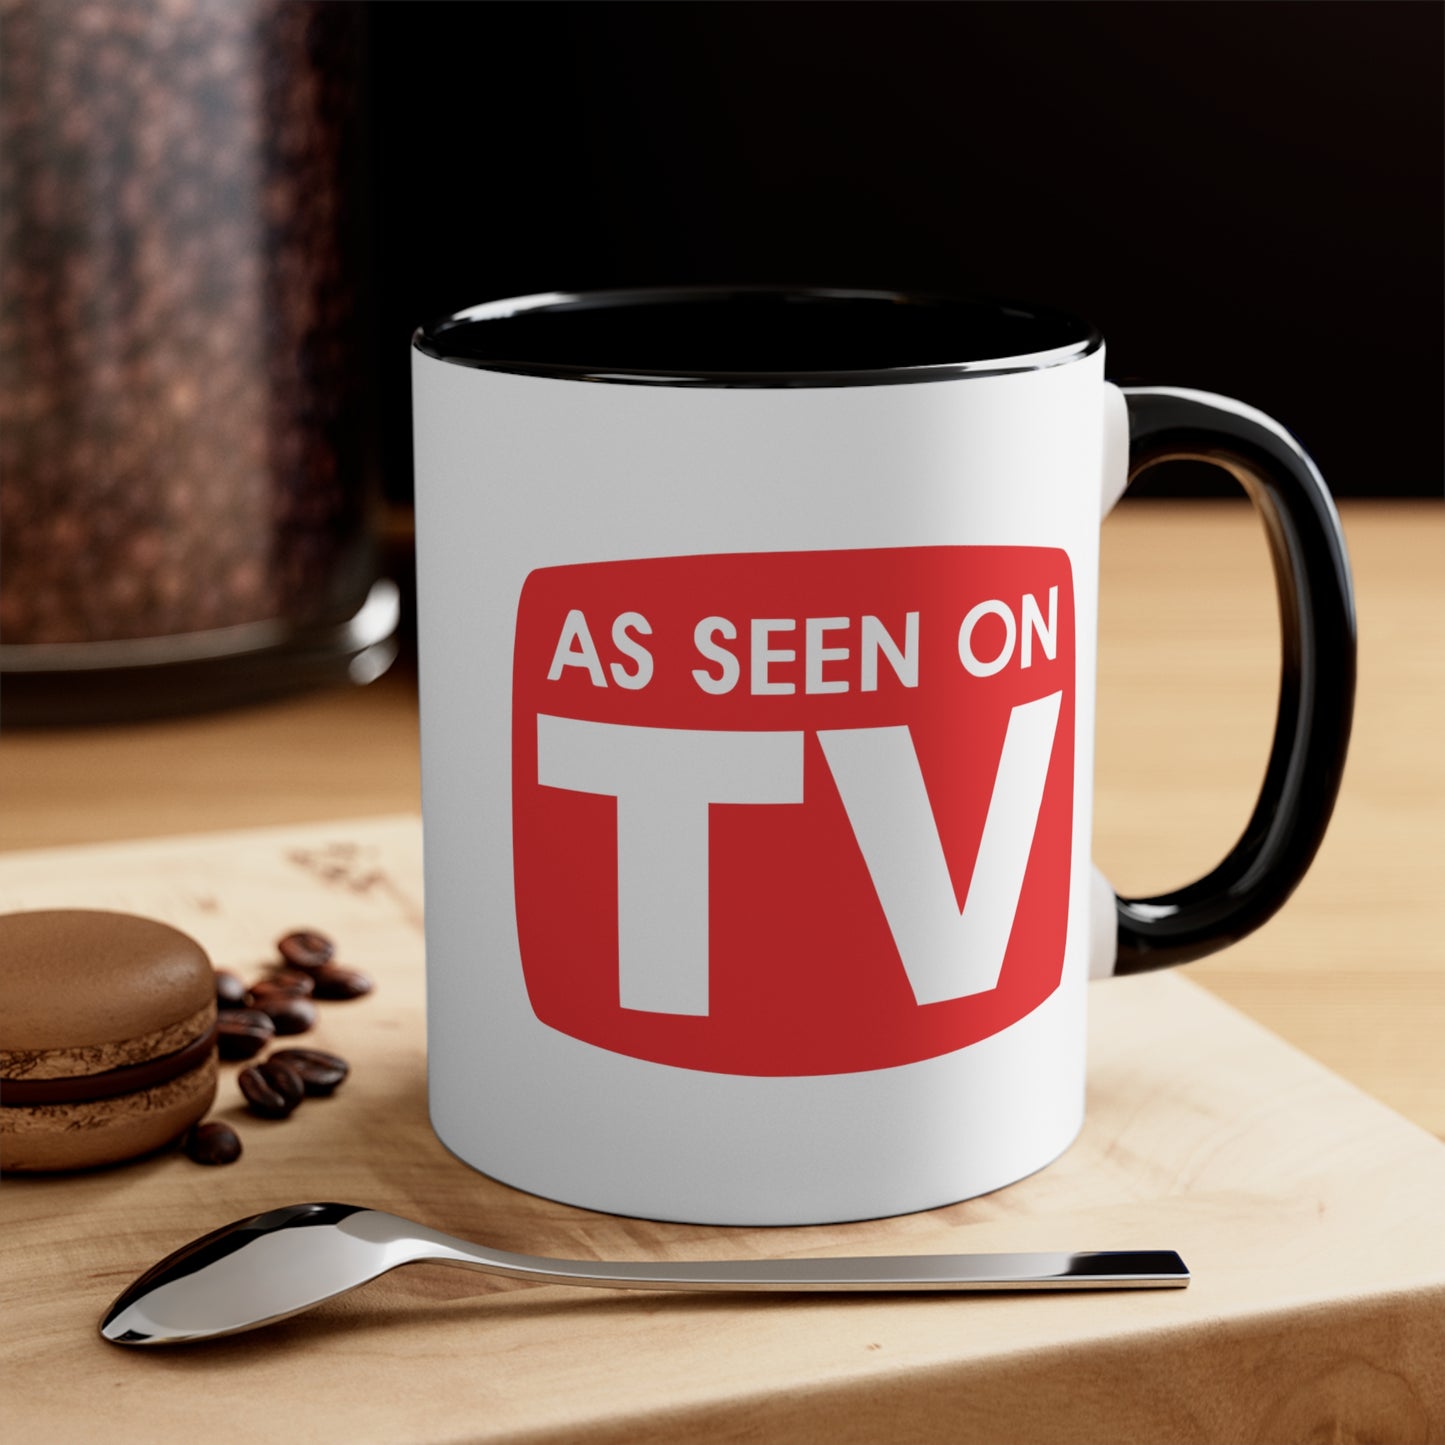 As Seen on TV Coffee Mug - Double Sided Black Accent White Ceramic 11oz by TheGlassyLass.com